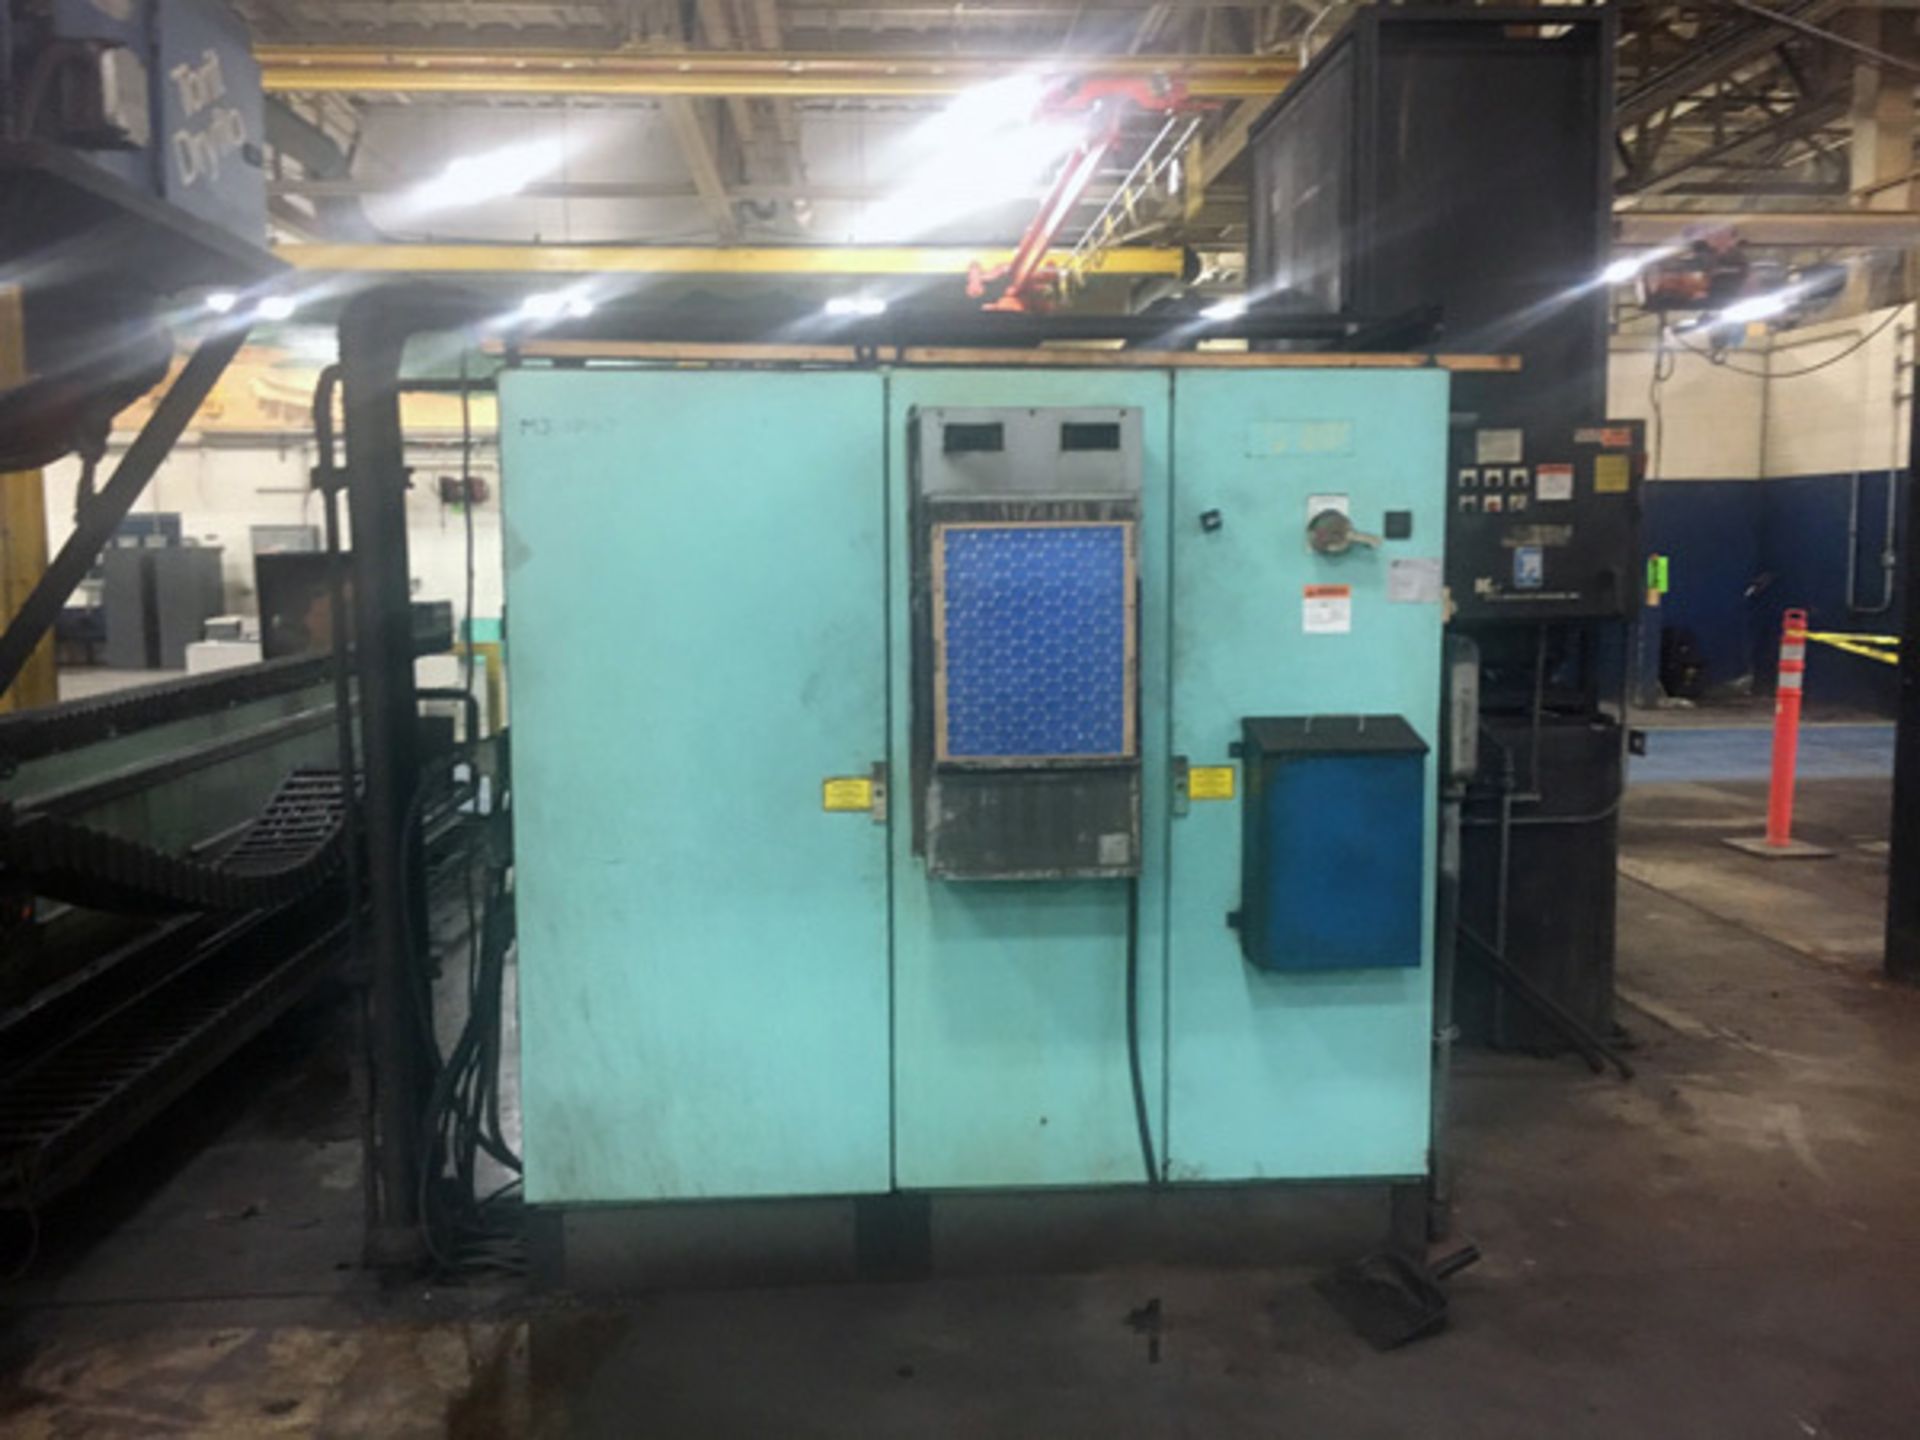 2002 Reform Twin Table CNC Knife Grinder 15" x 98" Each Table, Mdl: AR70 Type 8CNC, S/N: 7077, - Image 18 of 18